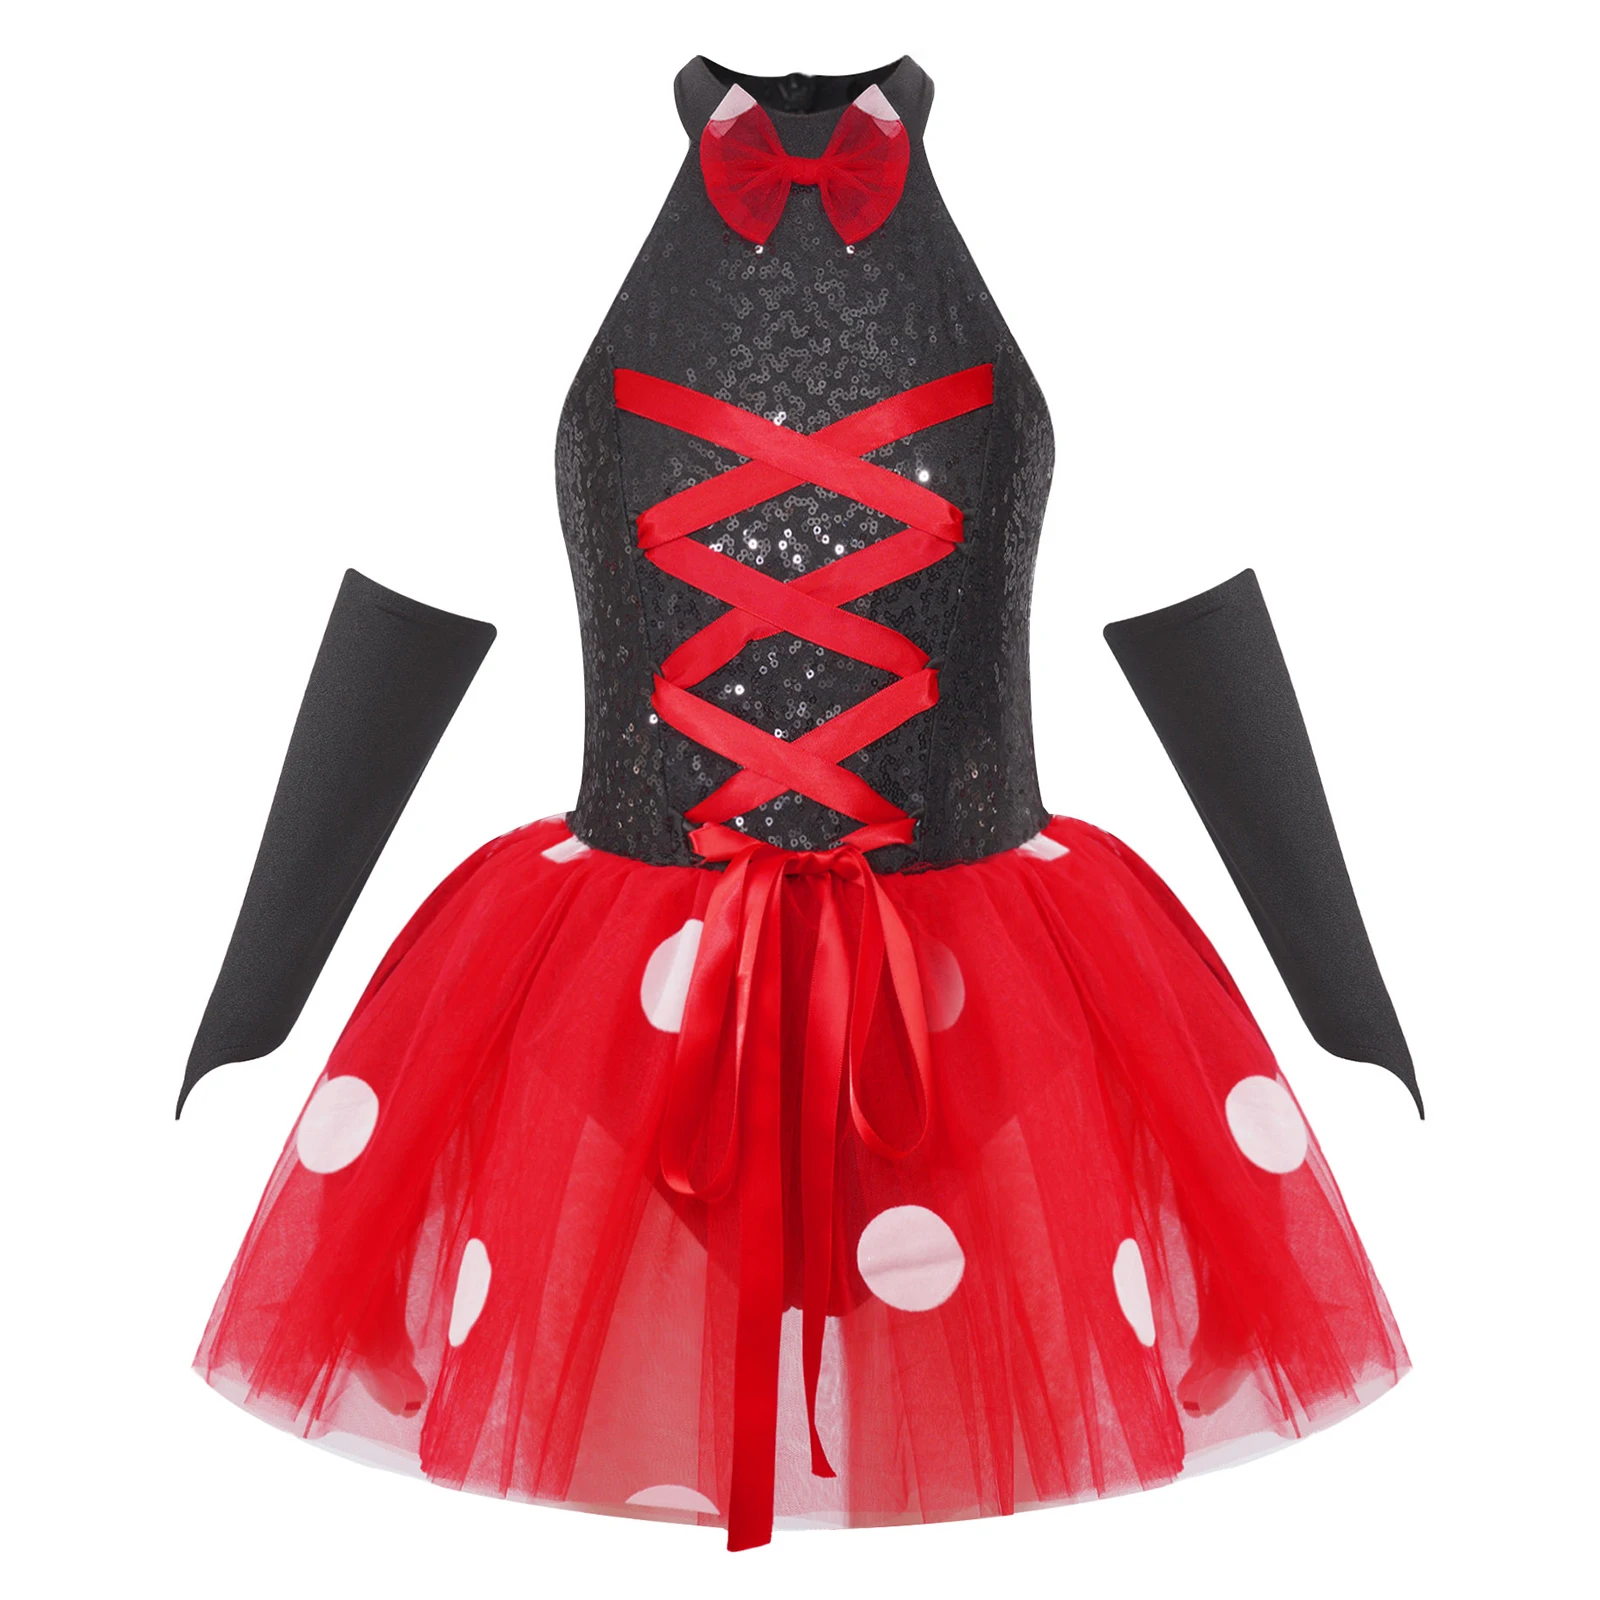 

Infant Child Girls Character Cosplay Charades Costume Halter Neck Sequins Lace-up Polka Dots Tutu Dress Bodysuit with Arm Sleeve